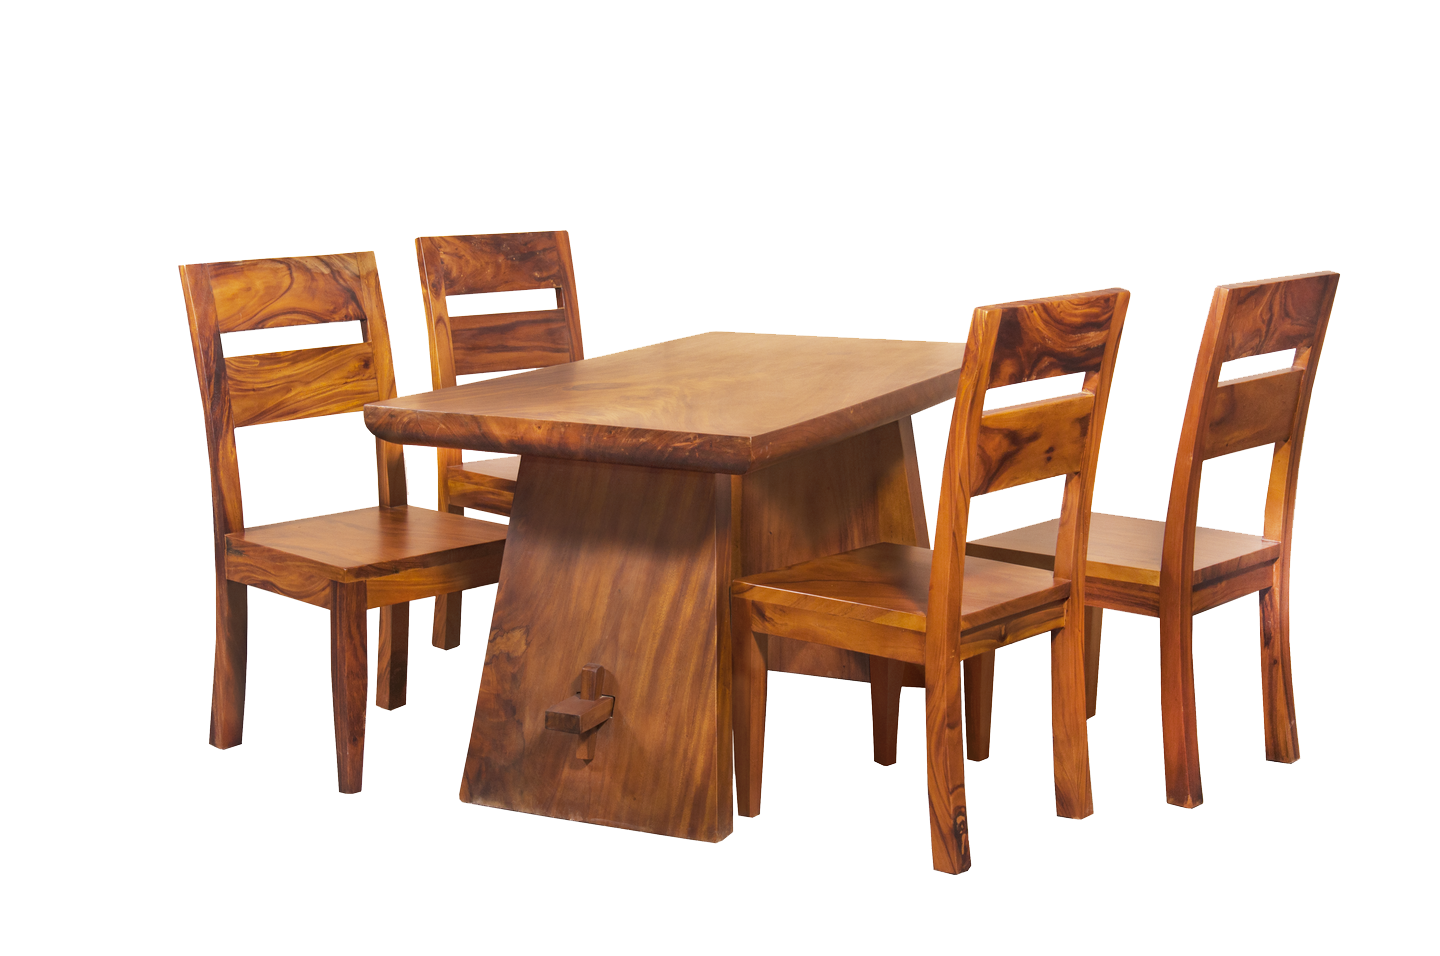 Old Dining Table PNG High Definition Photo Image